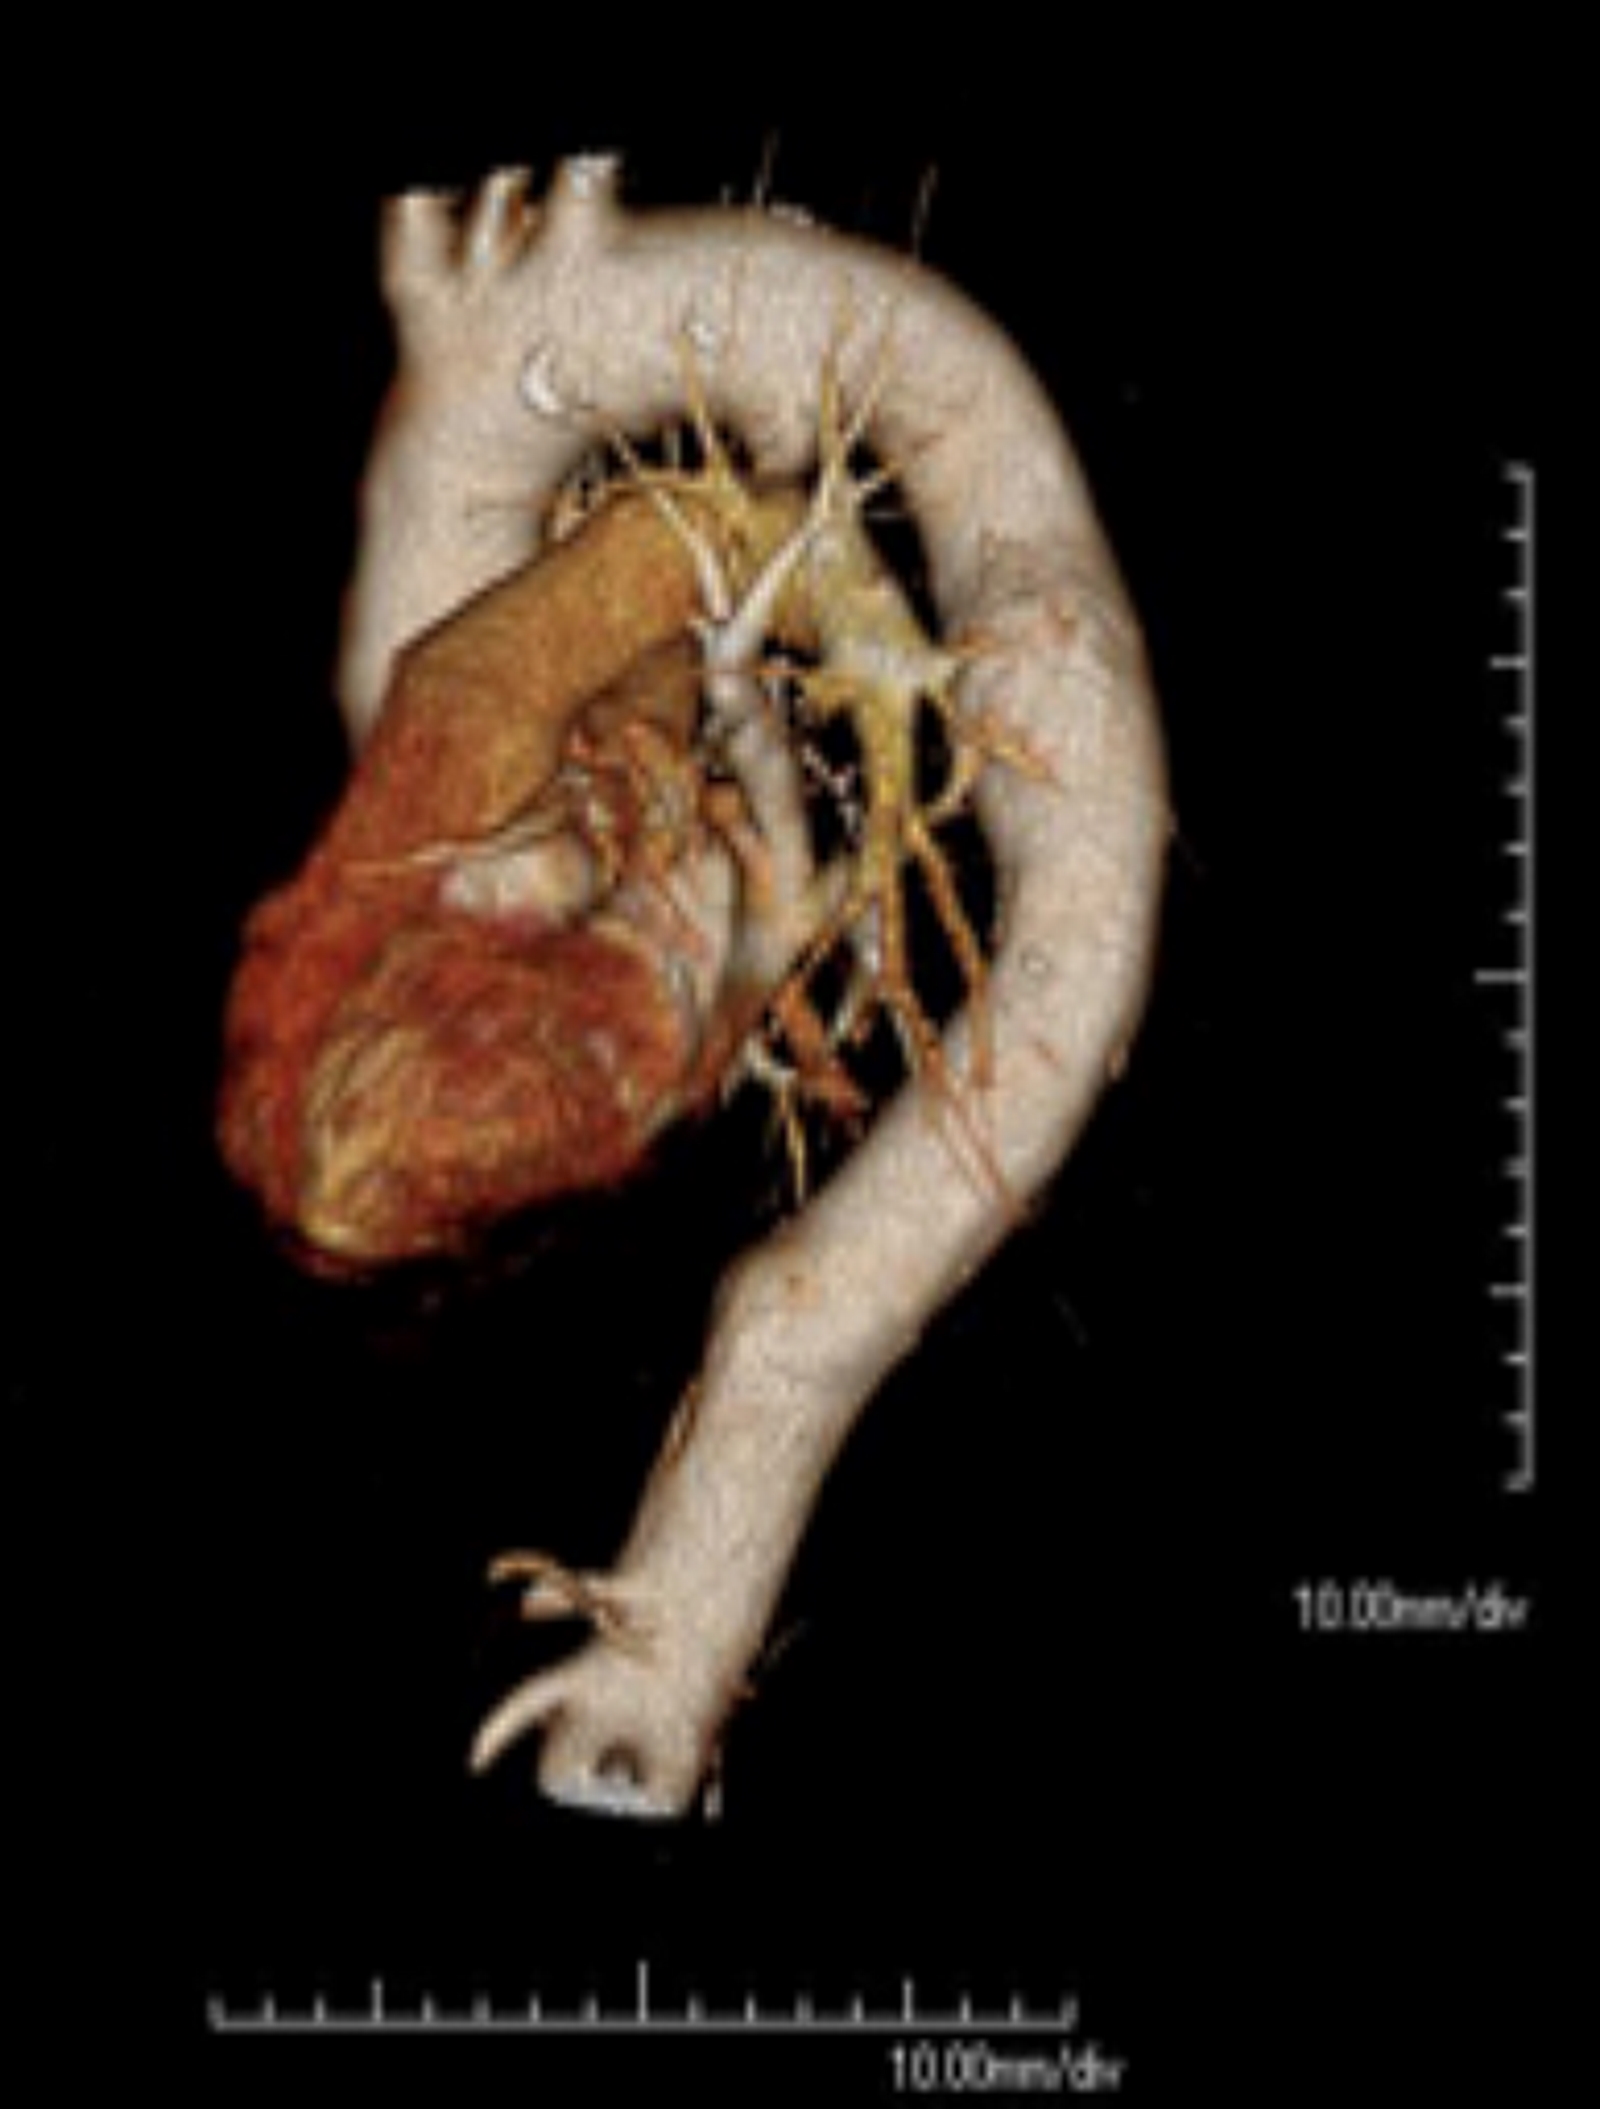 The image shows the thoracic aorta and the aortic arch, through an angio-CT examination.